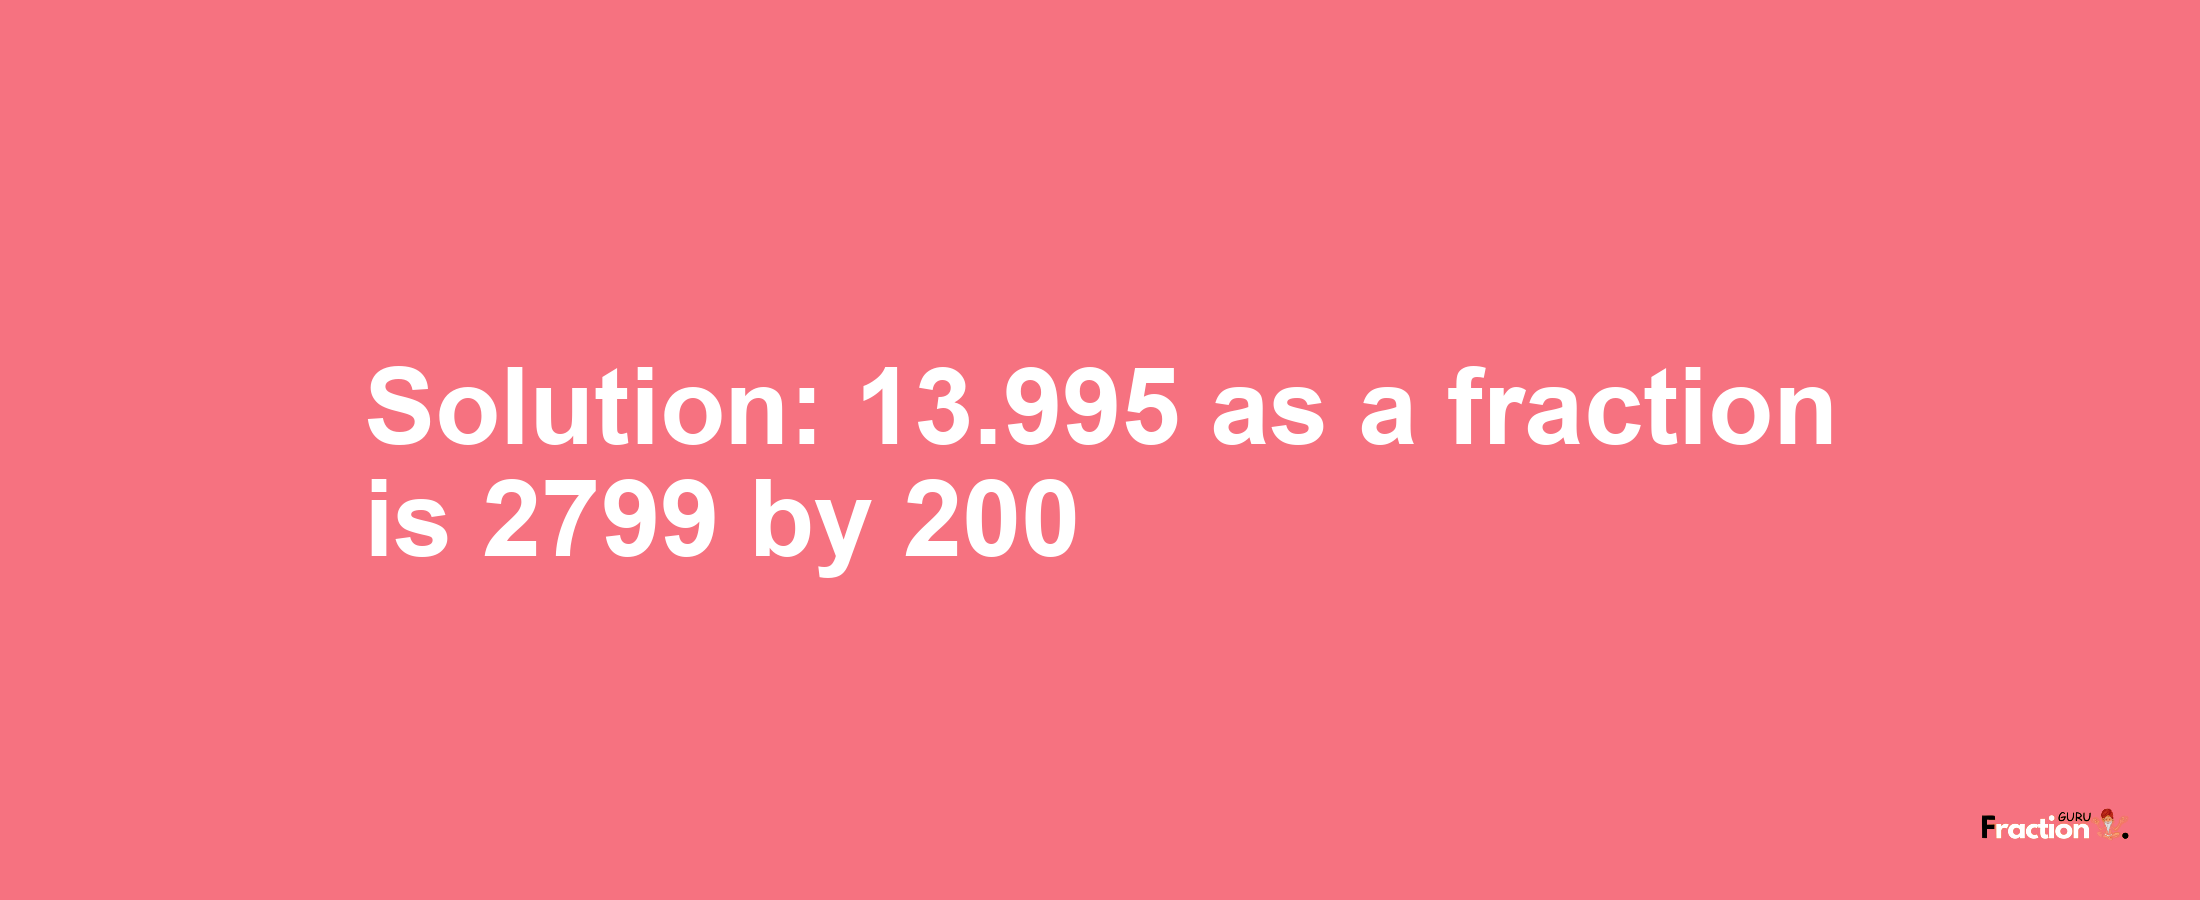 Solution:13.995 as a fraction is 2799/200